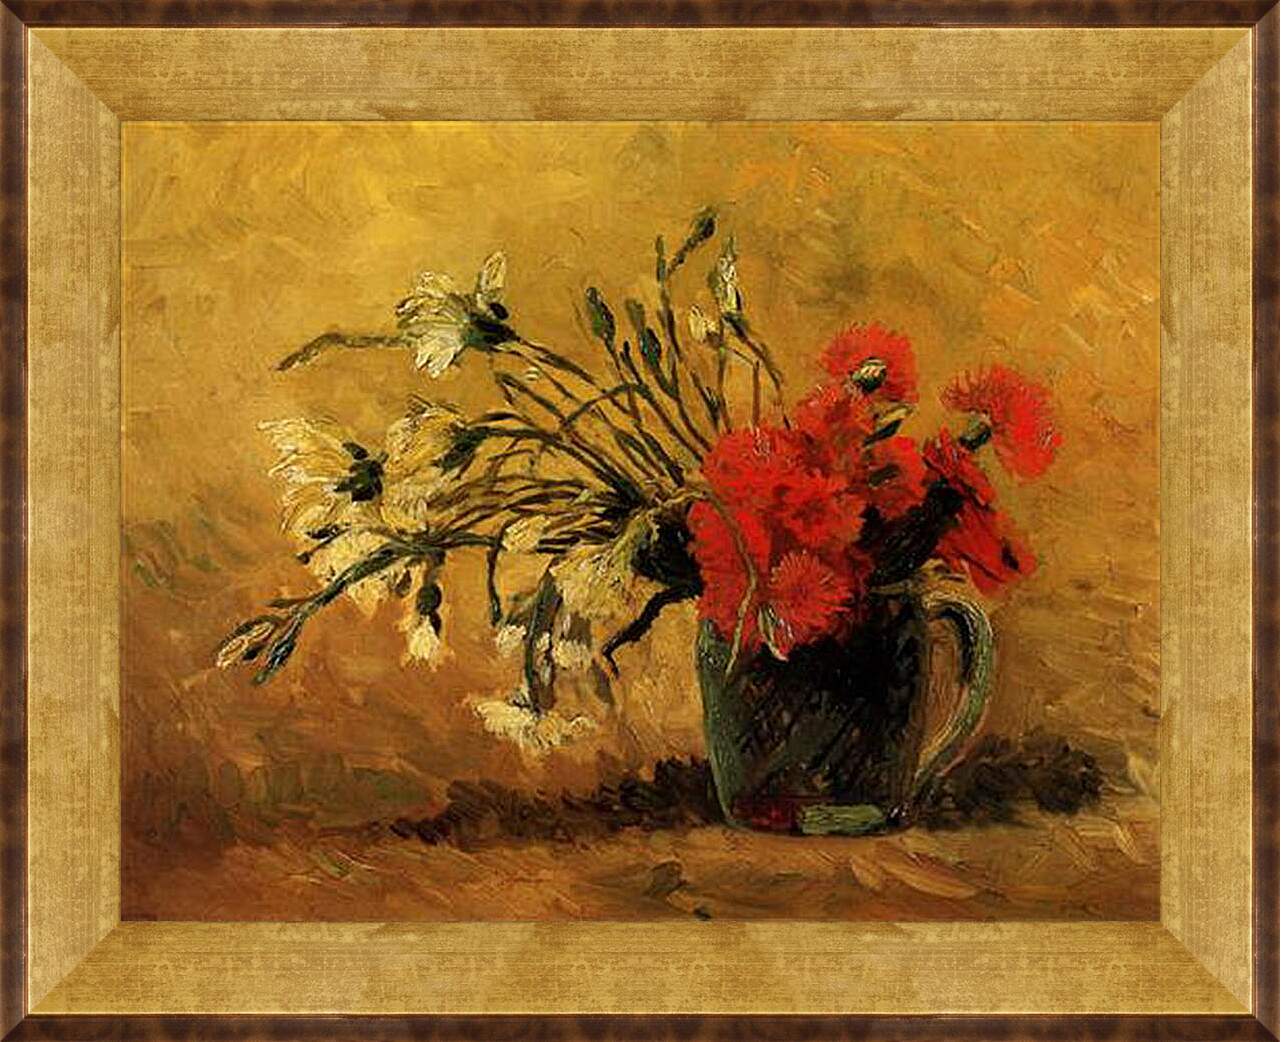 Картина в раме - Vase with Red and White Carnations on Yellow Background. Винсент Ван Гог
